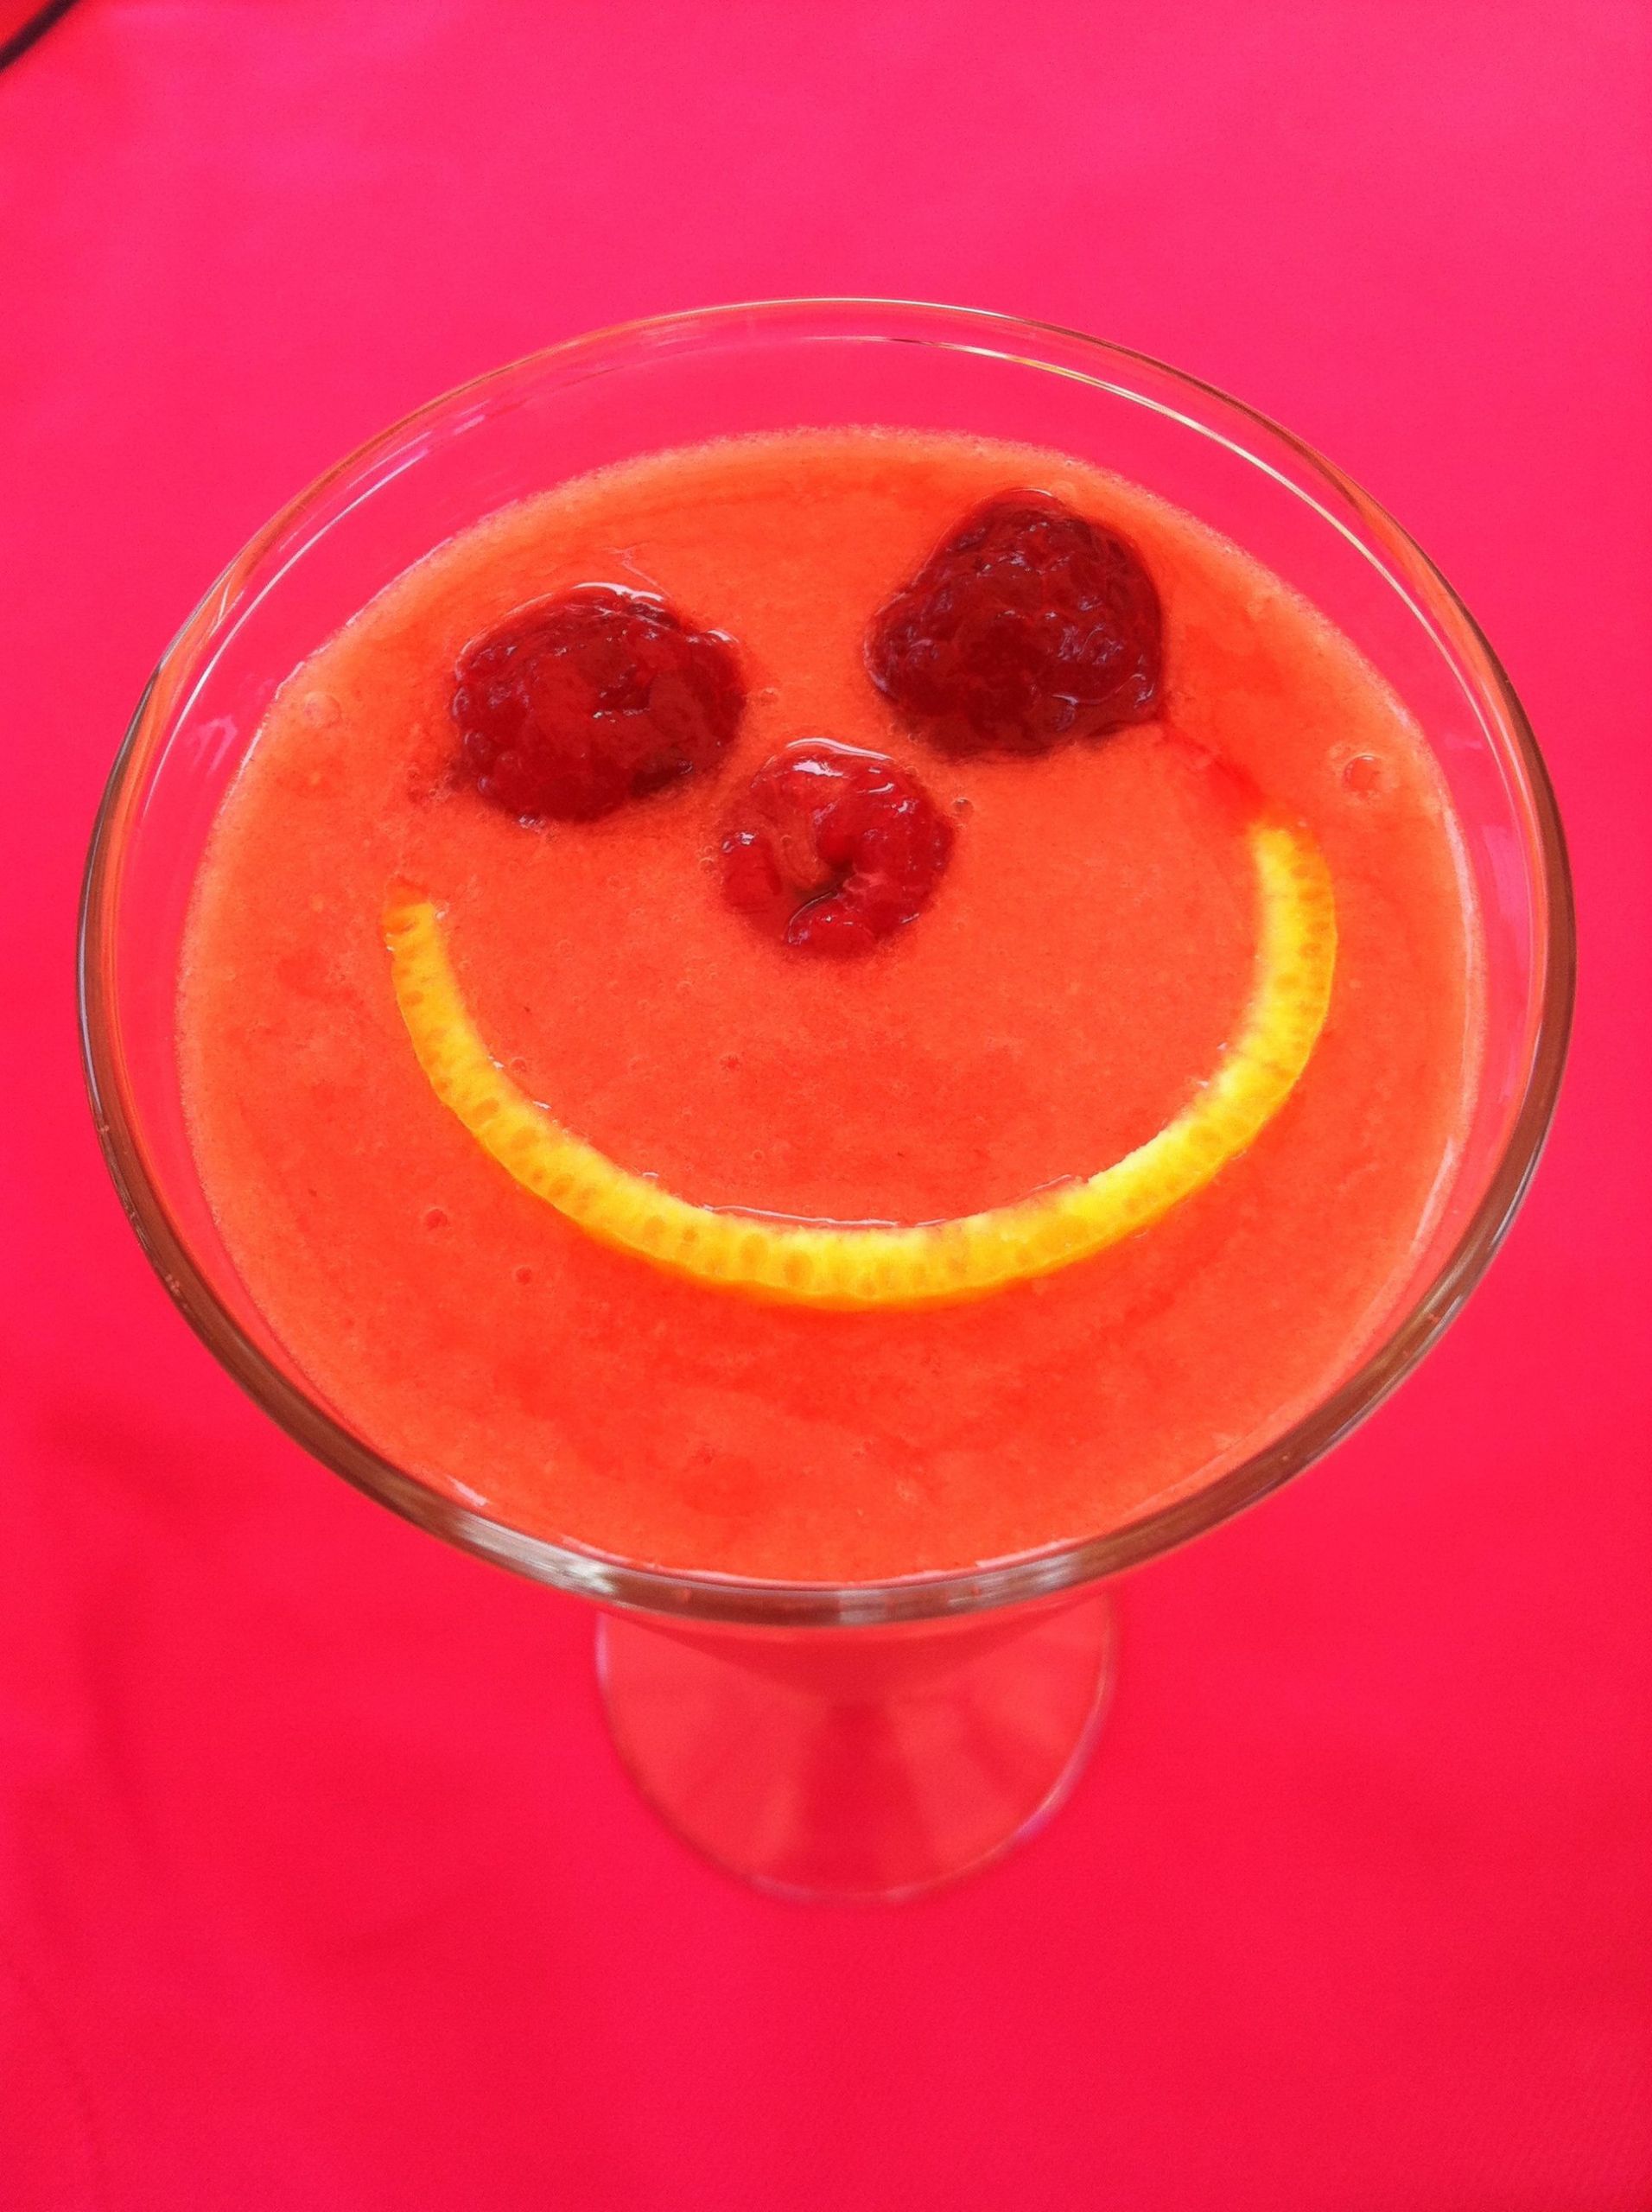 Healthy Kid Friendly Smoothies
 How to Make Healthy Kid Friendly Recipes for Smoothies